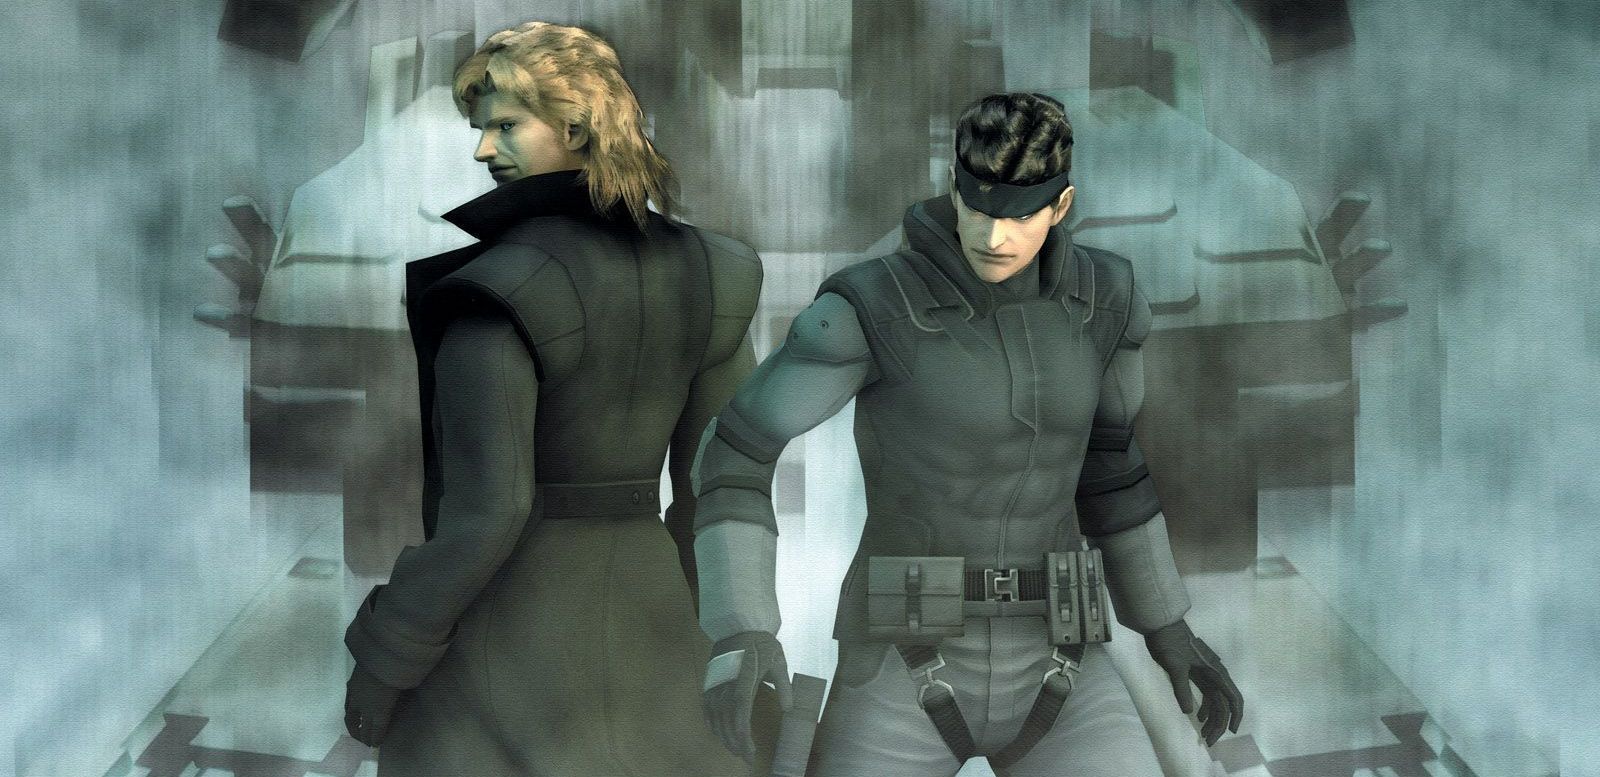 Metal Gear Solid Twin Snakes